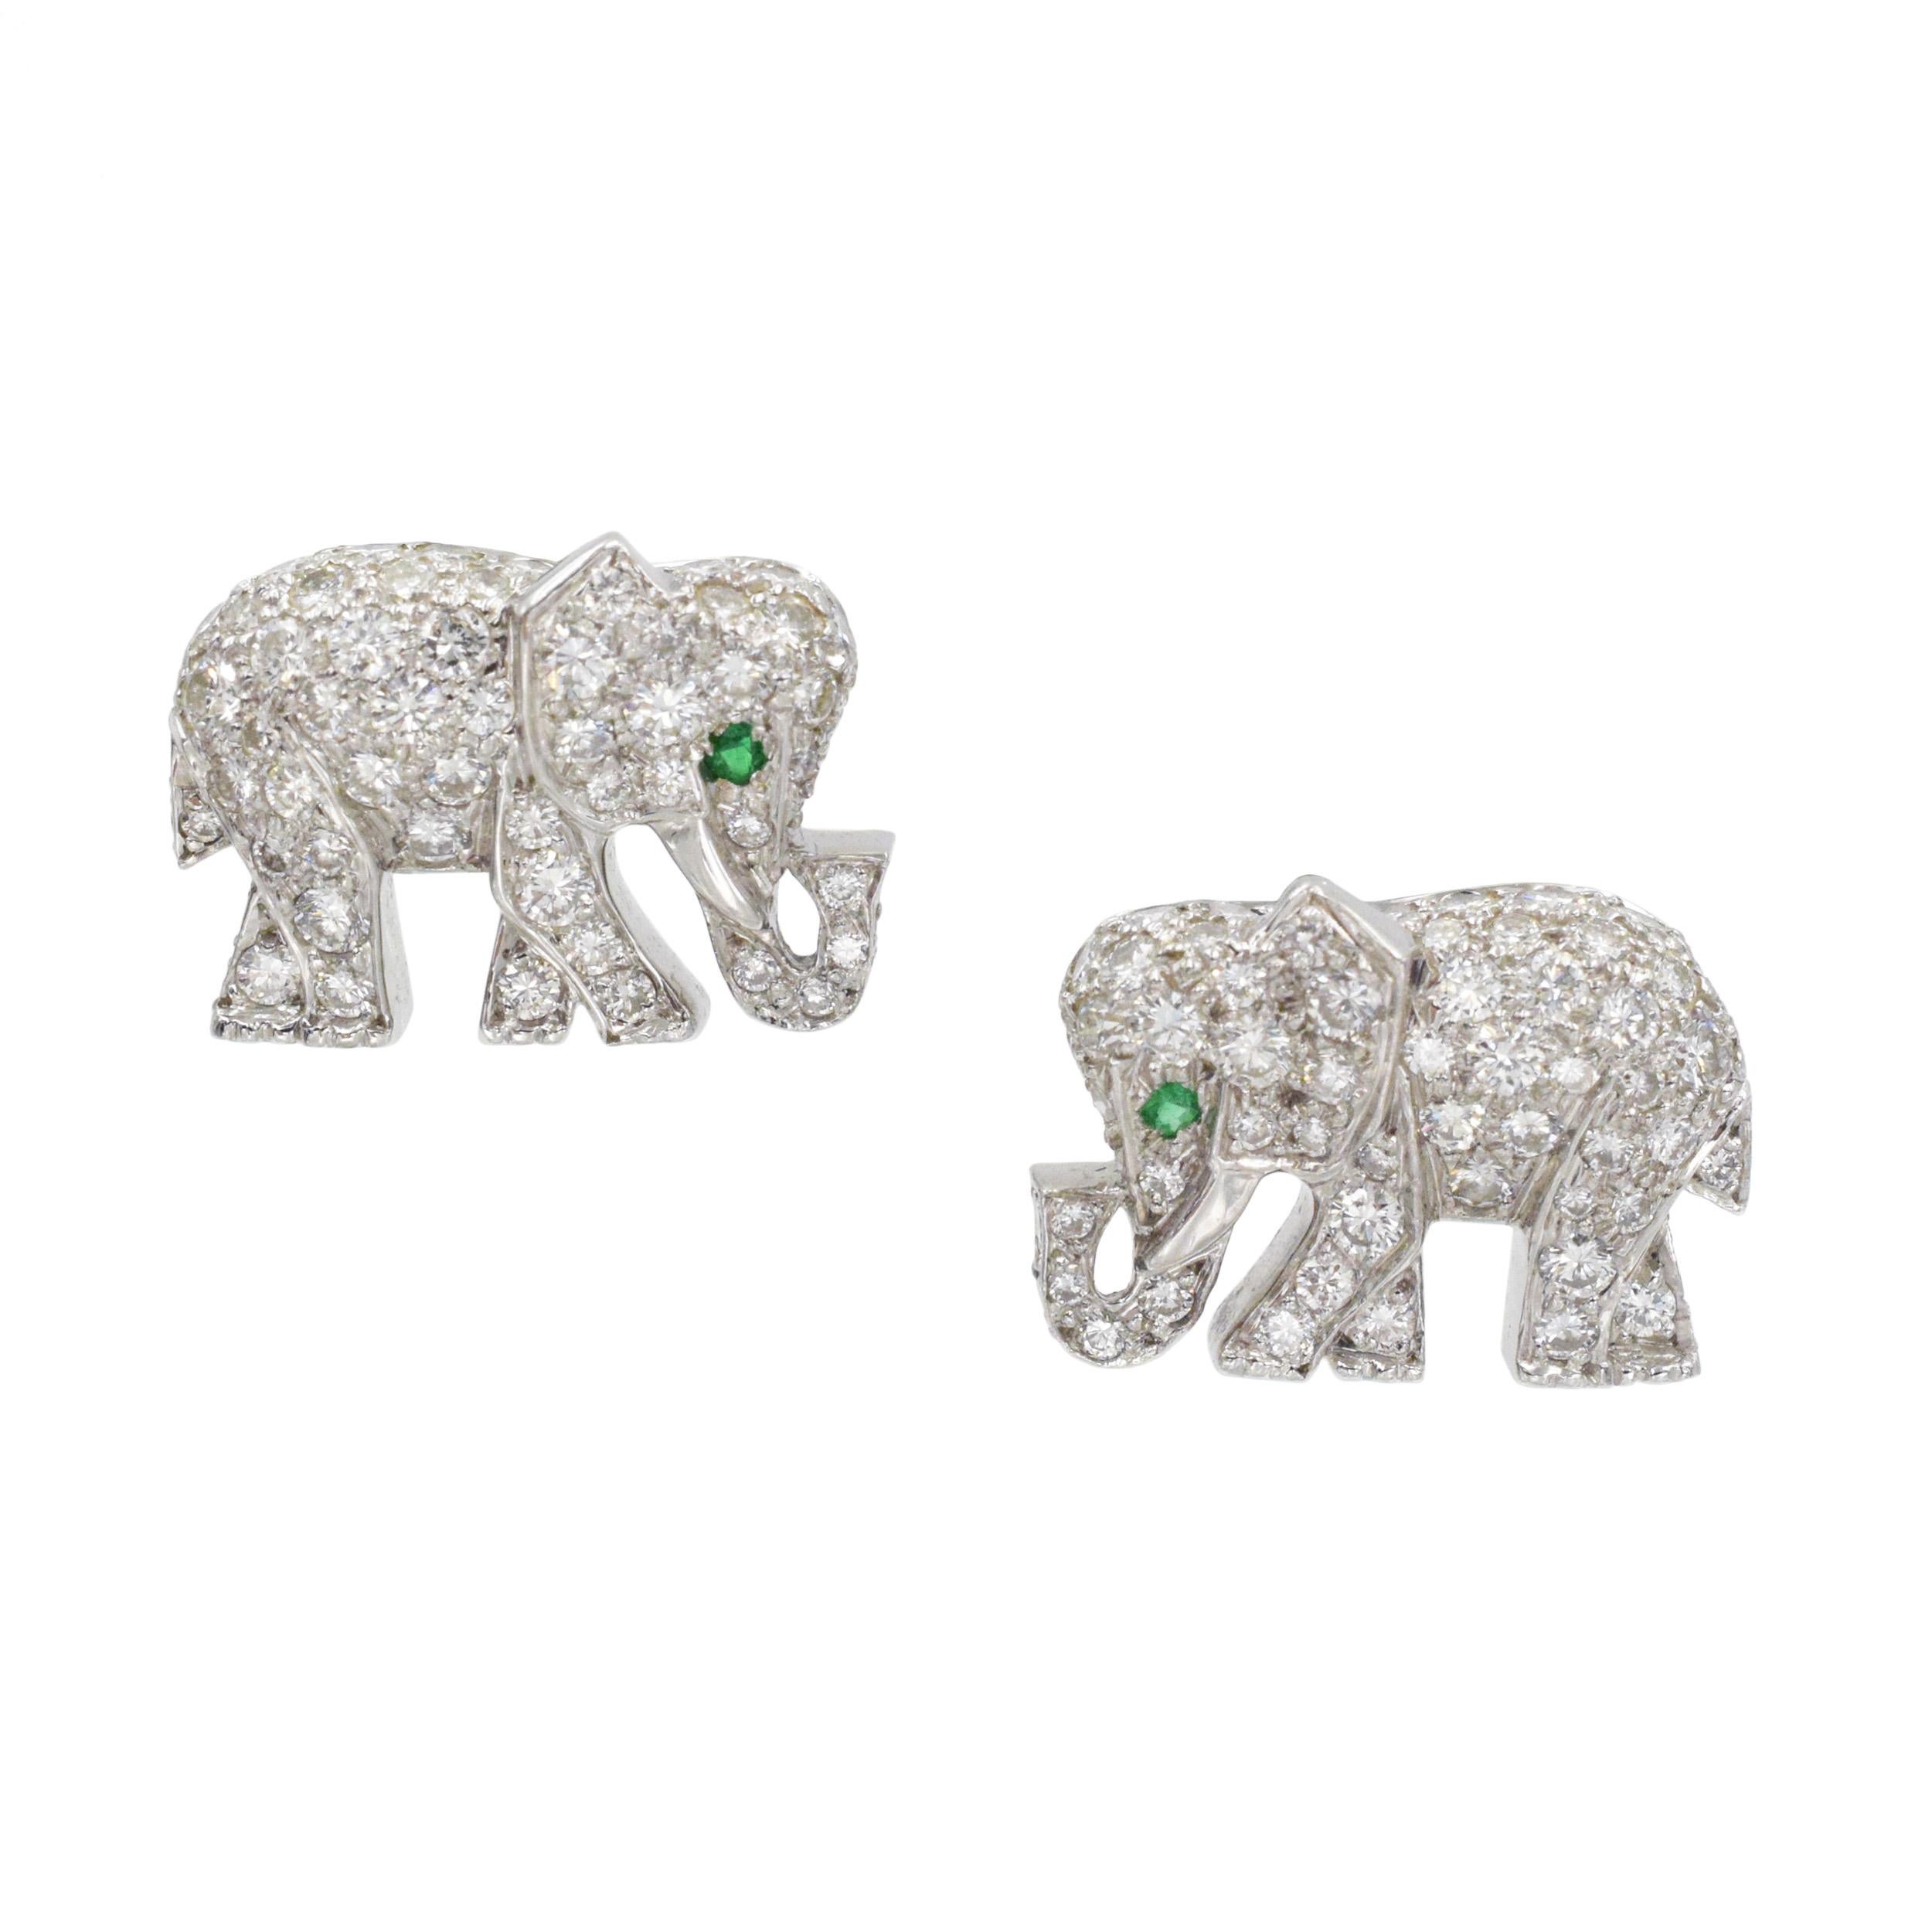 Cartier Diamond and Emerald Elephant Brooch and Earrings Set In Platinum. 2